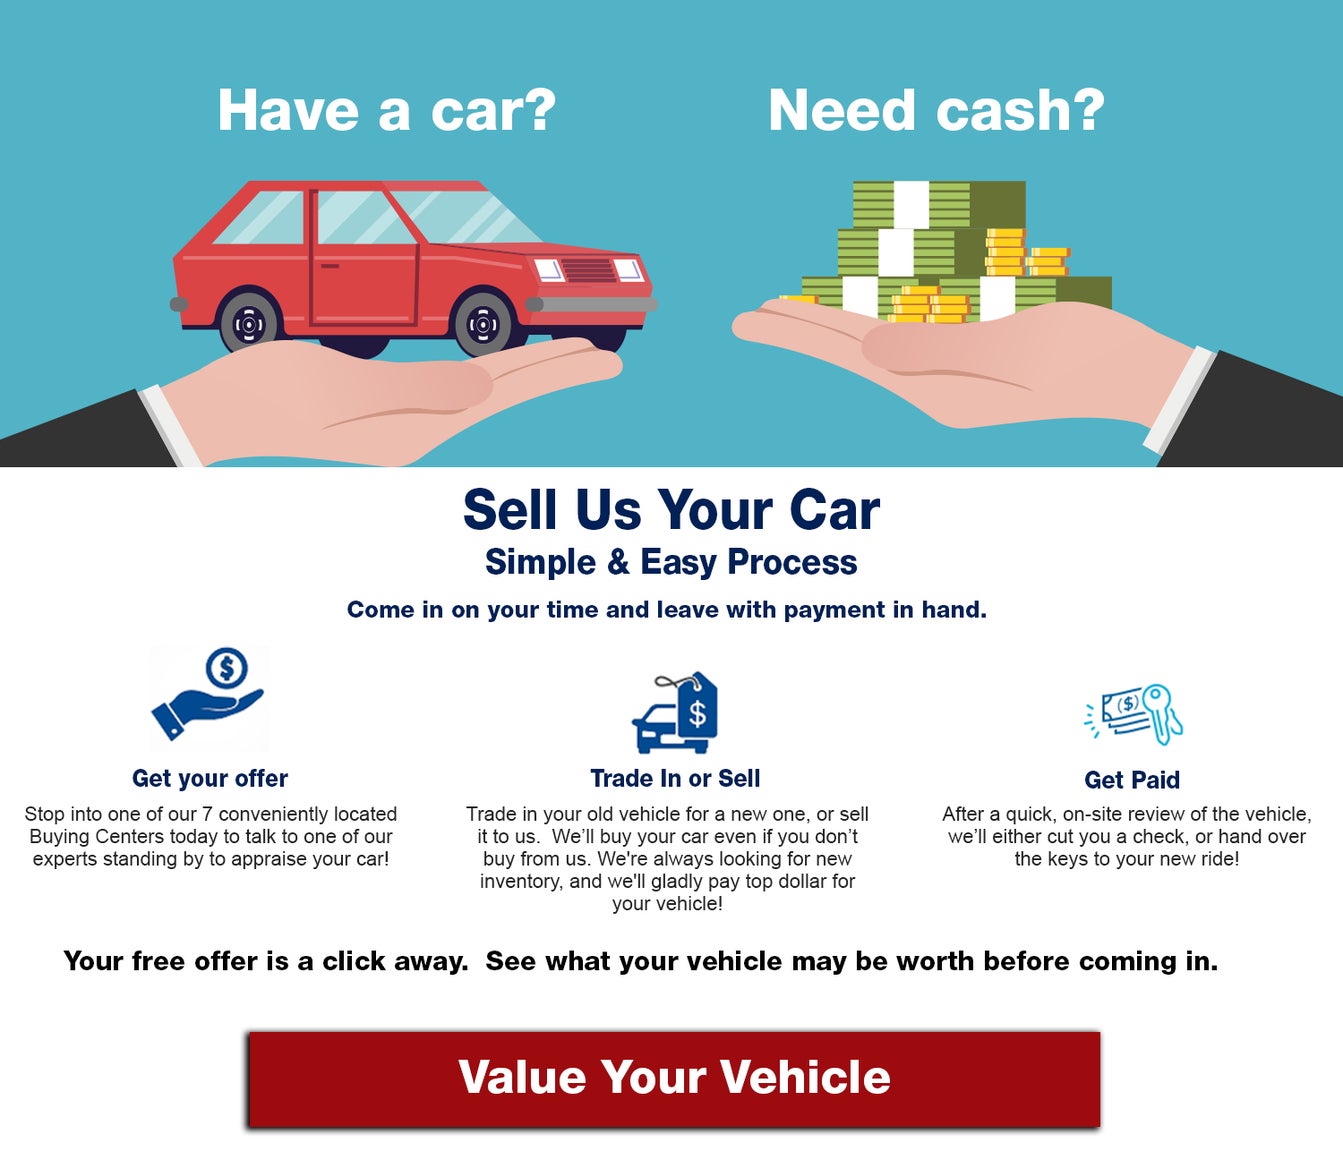 Sell us your car